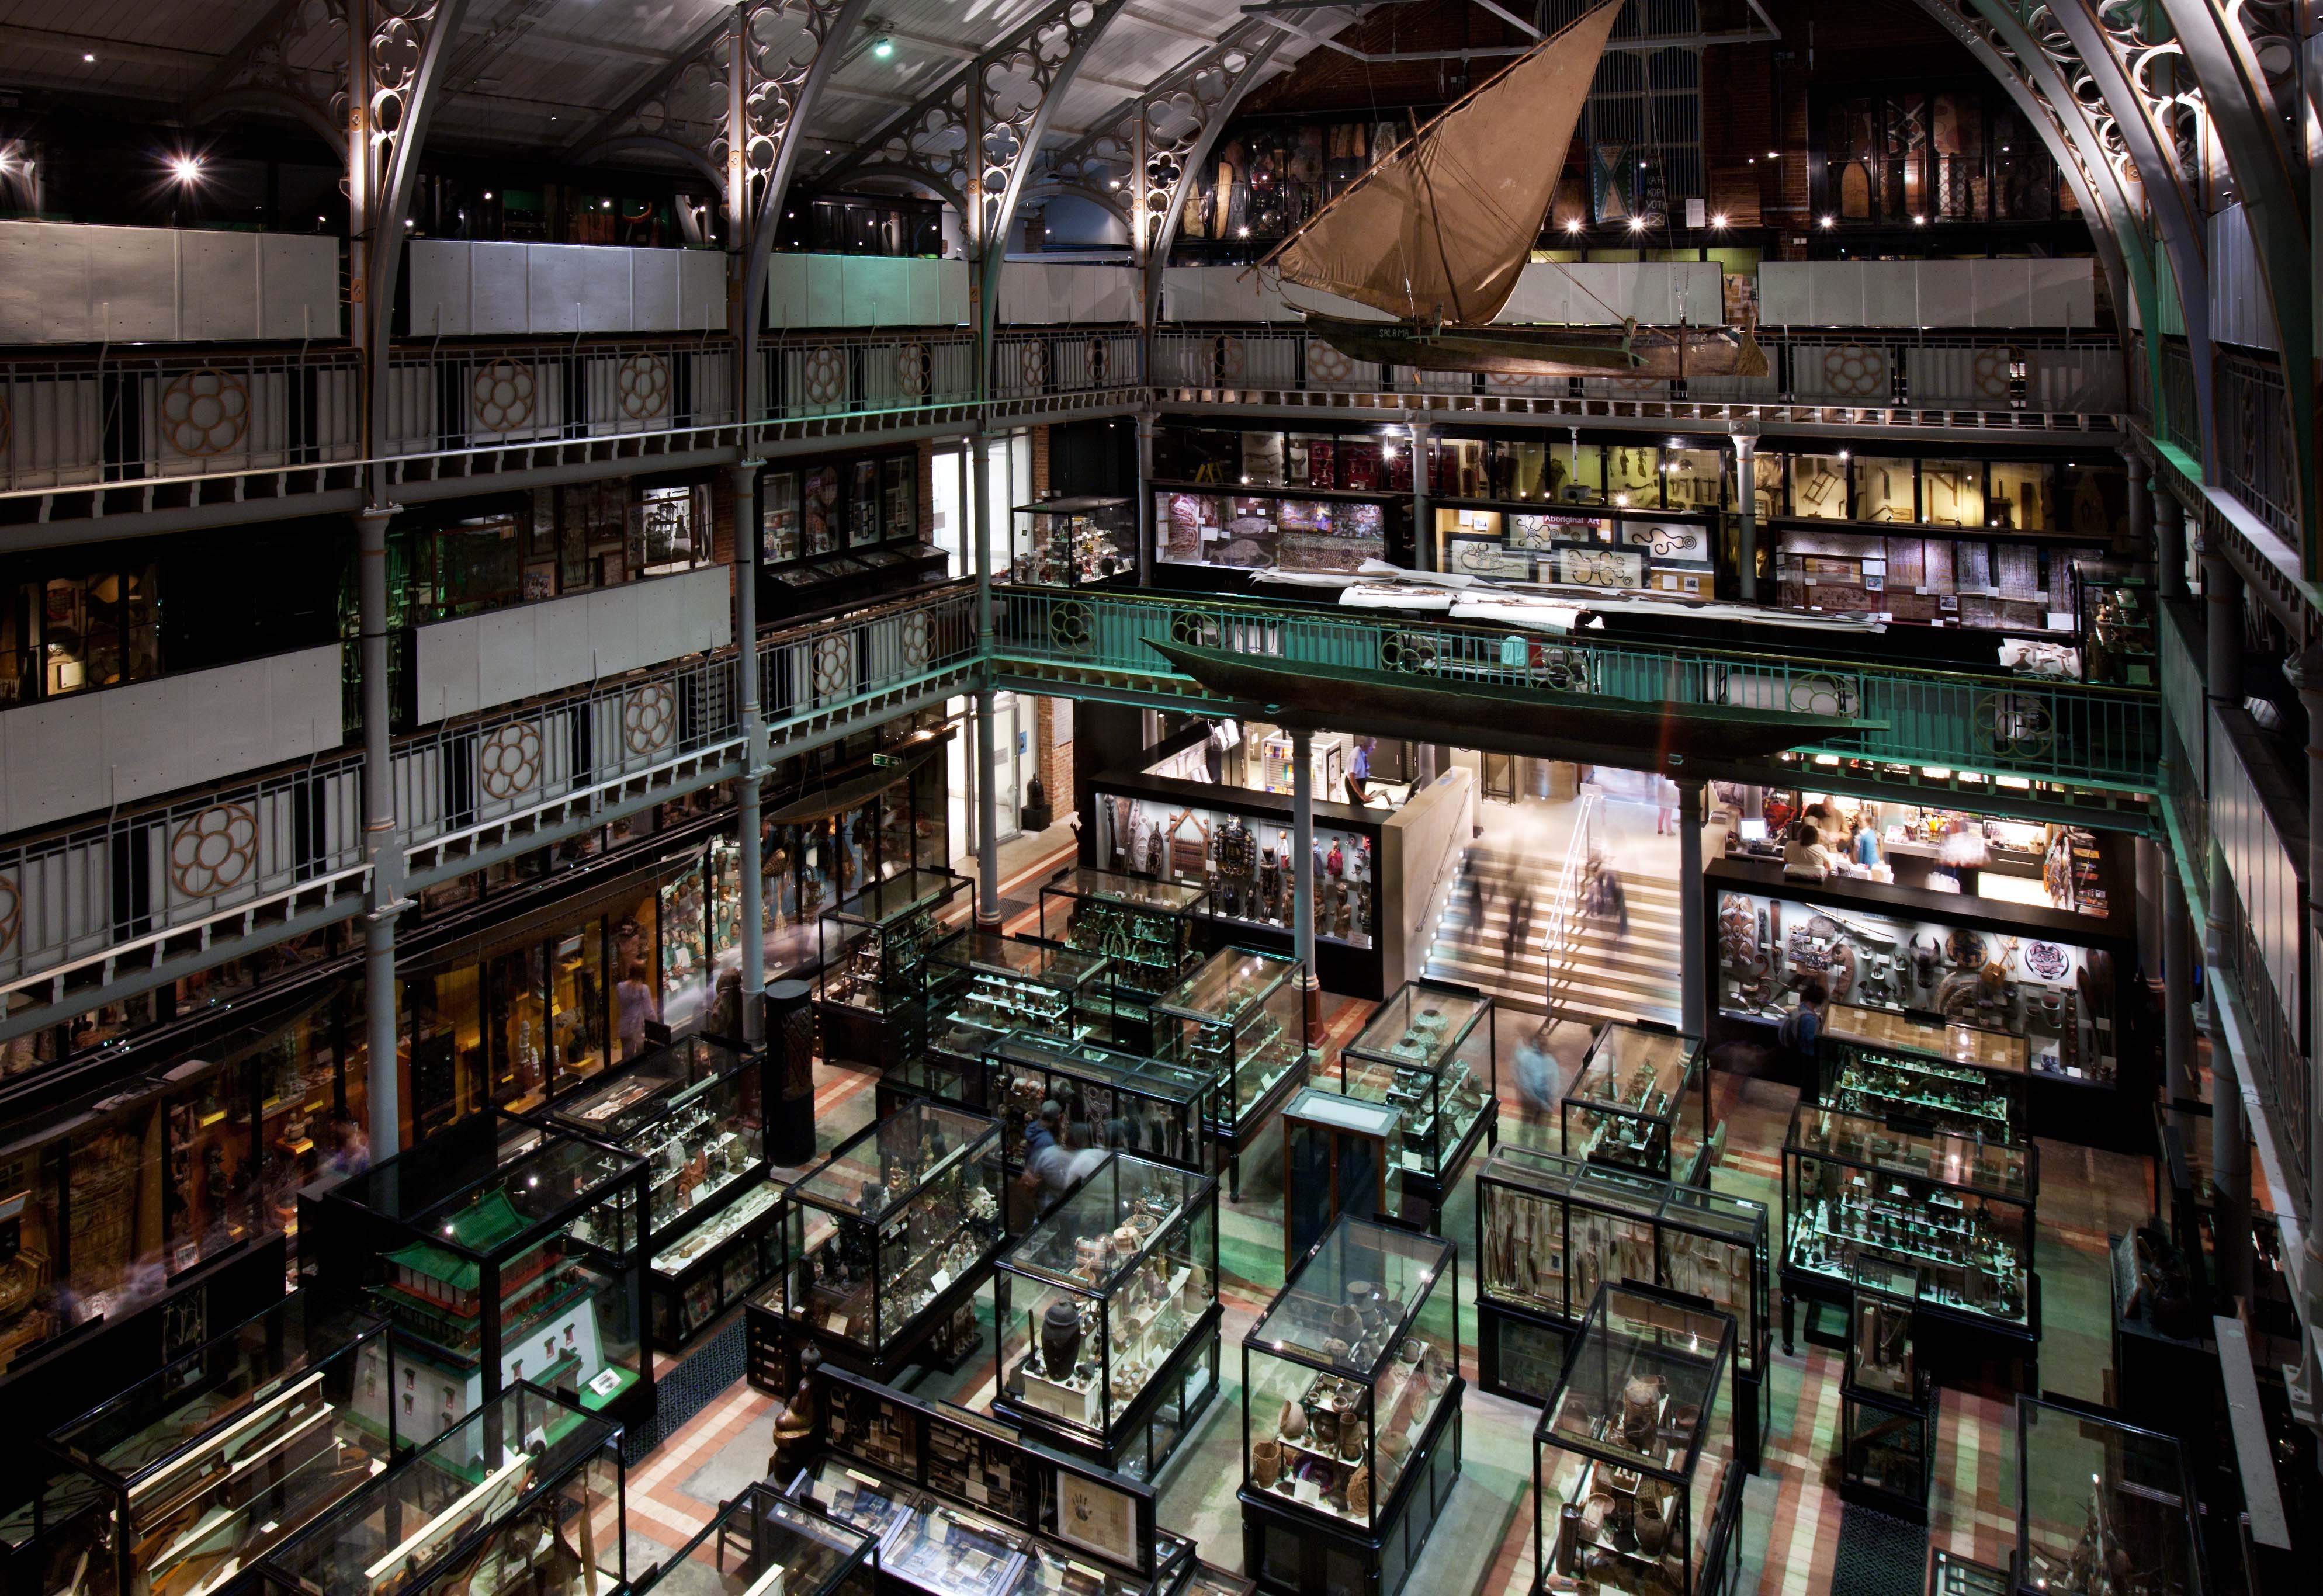 View of archaeological and ethnographic collections, Pitt Rivers Museum, Oxford, photo: Jorge Royan, CC: BY-SA 3.0)